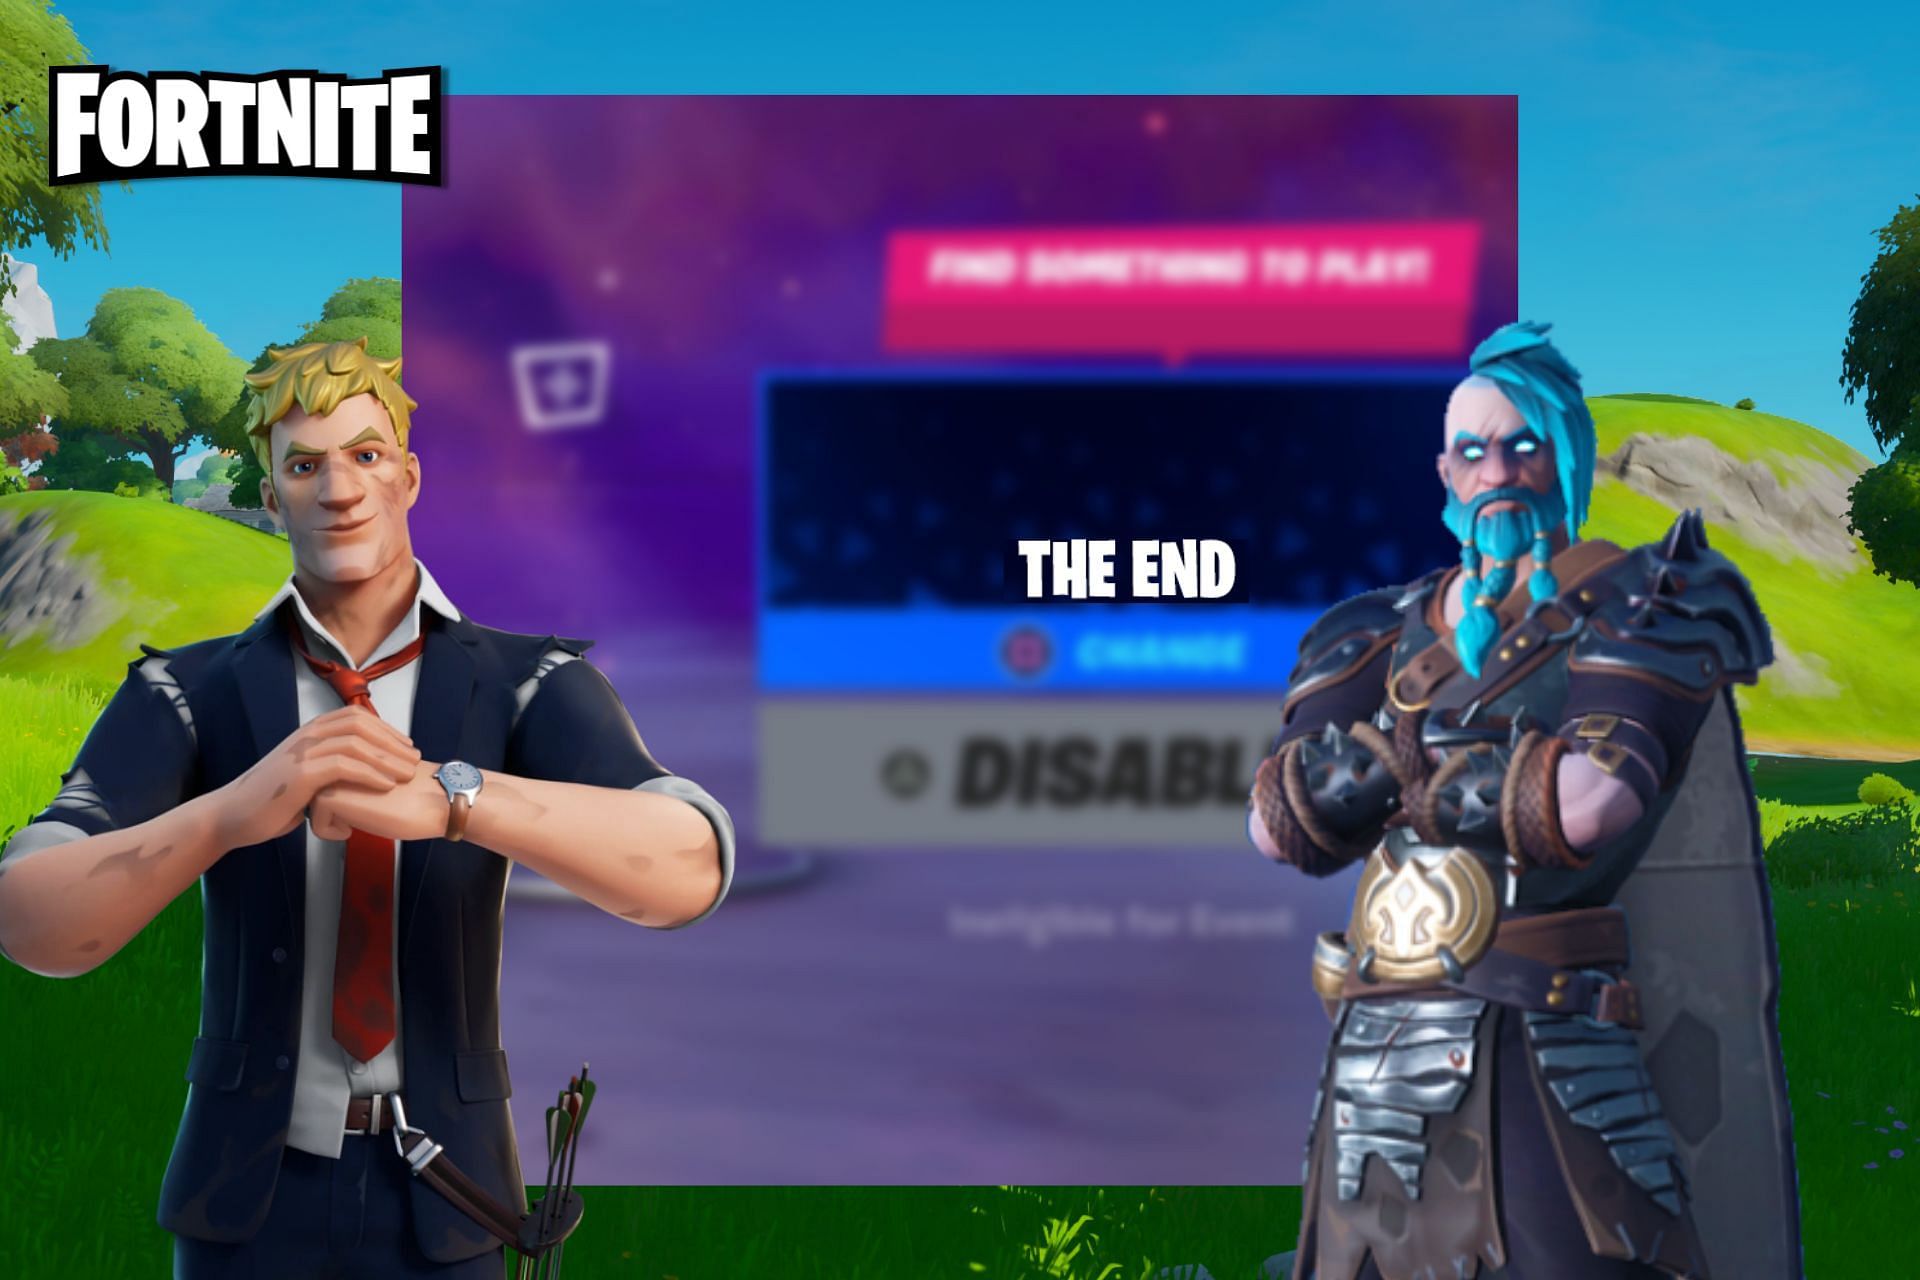 The live event for Season 8 of Fortnite has been leaked and some players have spotted the &quot;The End&quot; in the game (Image via Sportskeeda)